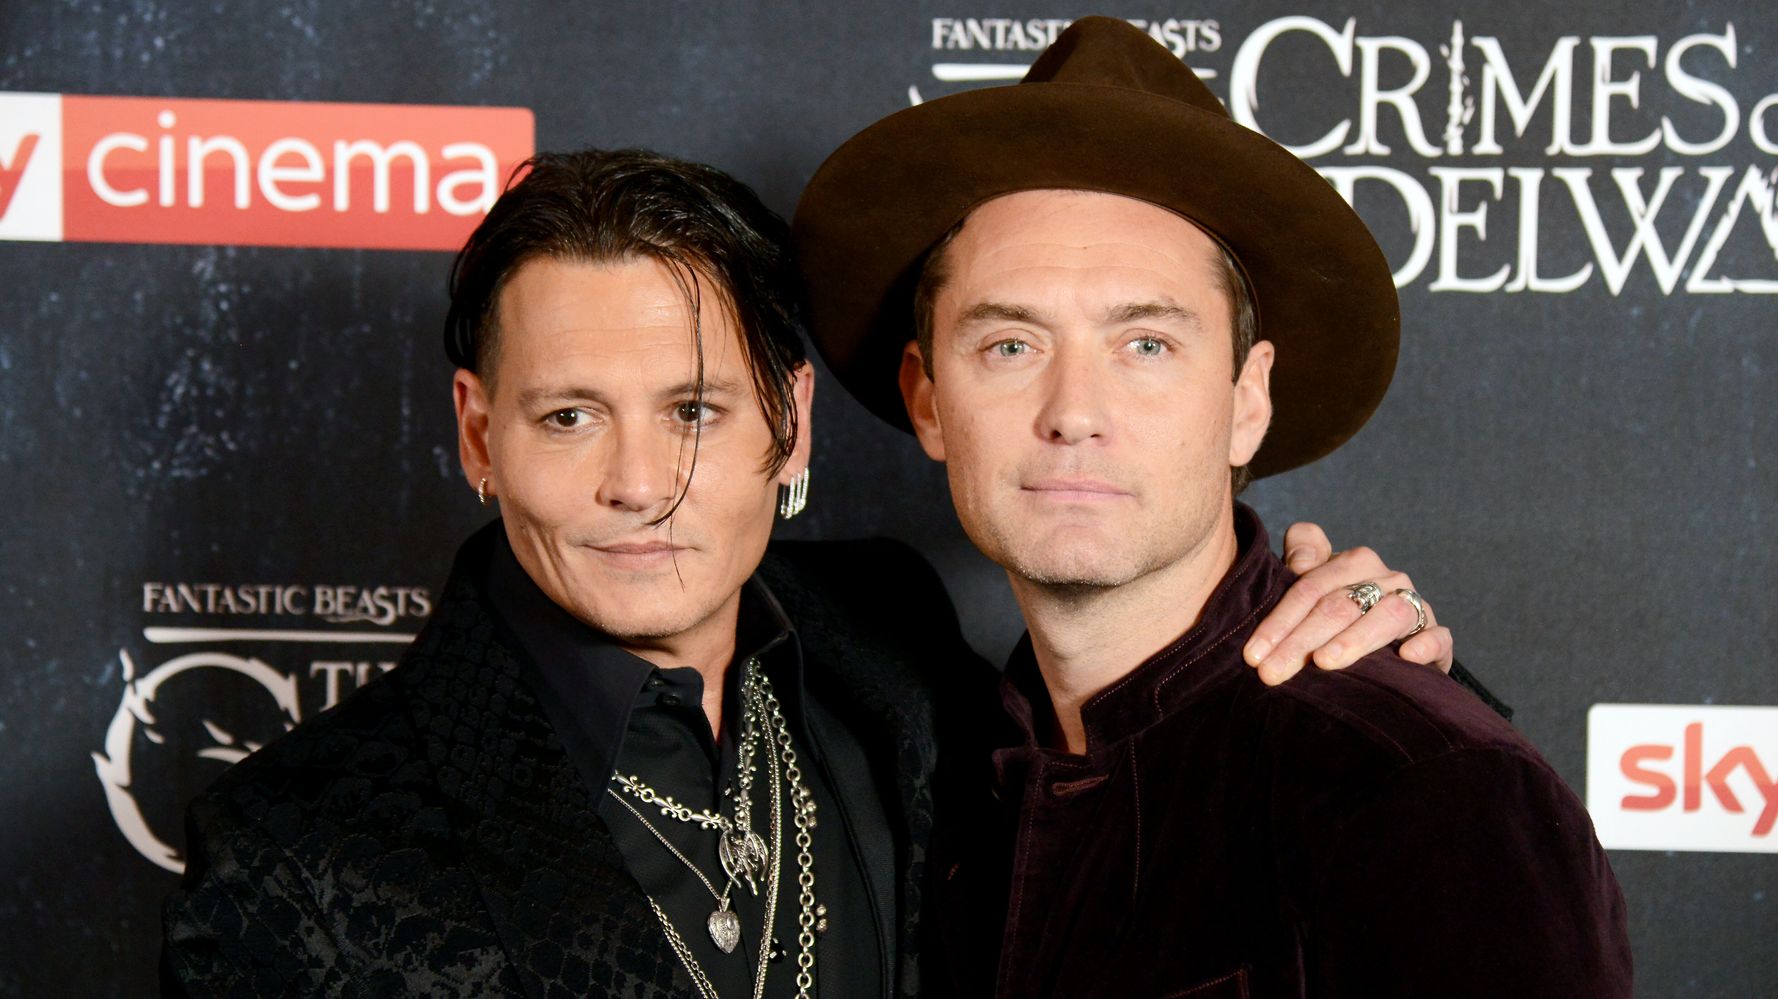 Jude Law Reacts To Johnny Depp’s ‘Unusual’ Exit From ‘Fantastic Beasts’